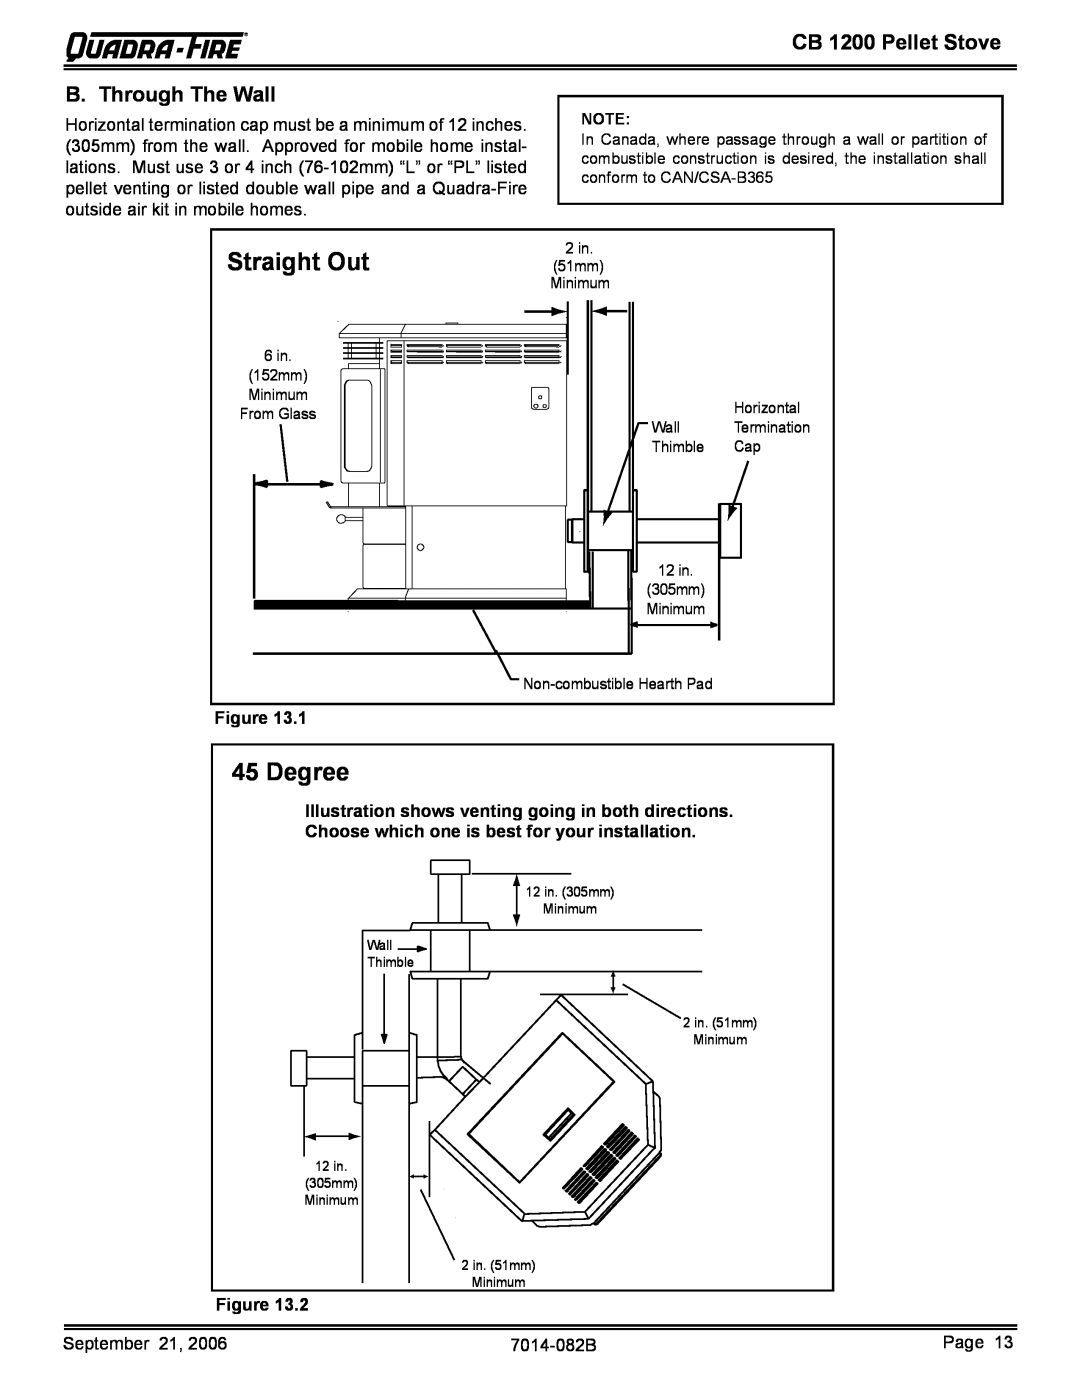 Quadra-Fire CB1200 owner manual Straight Out, Degree, B. Through The Wall, CB 1200 Pellet Stove 